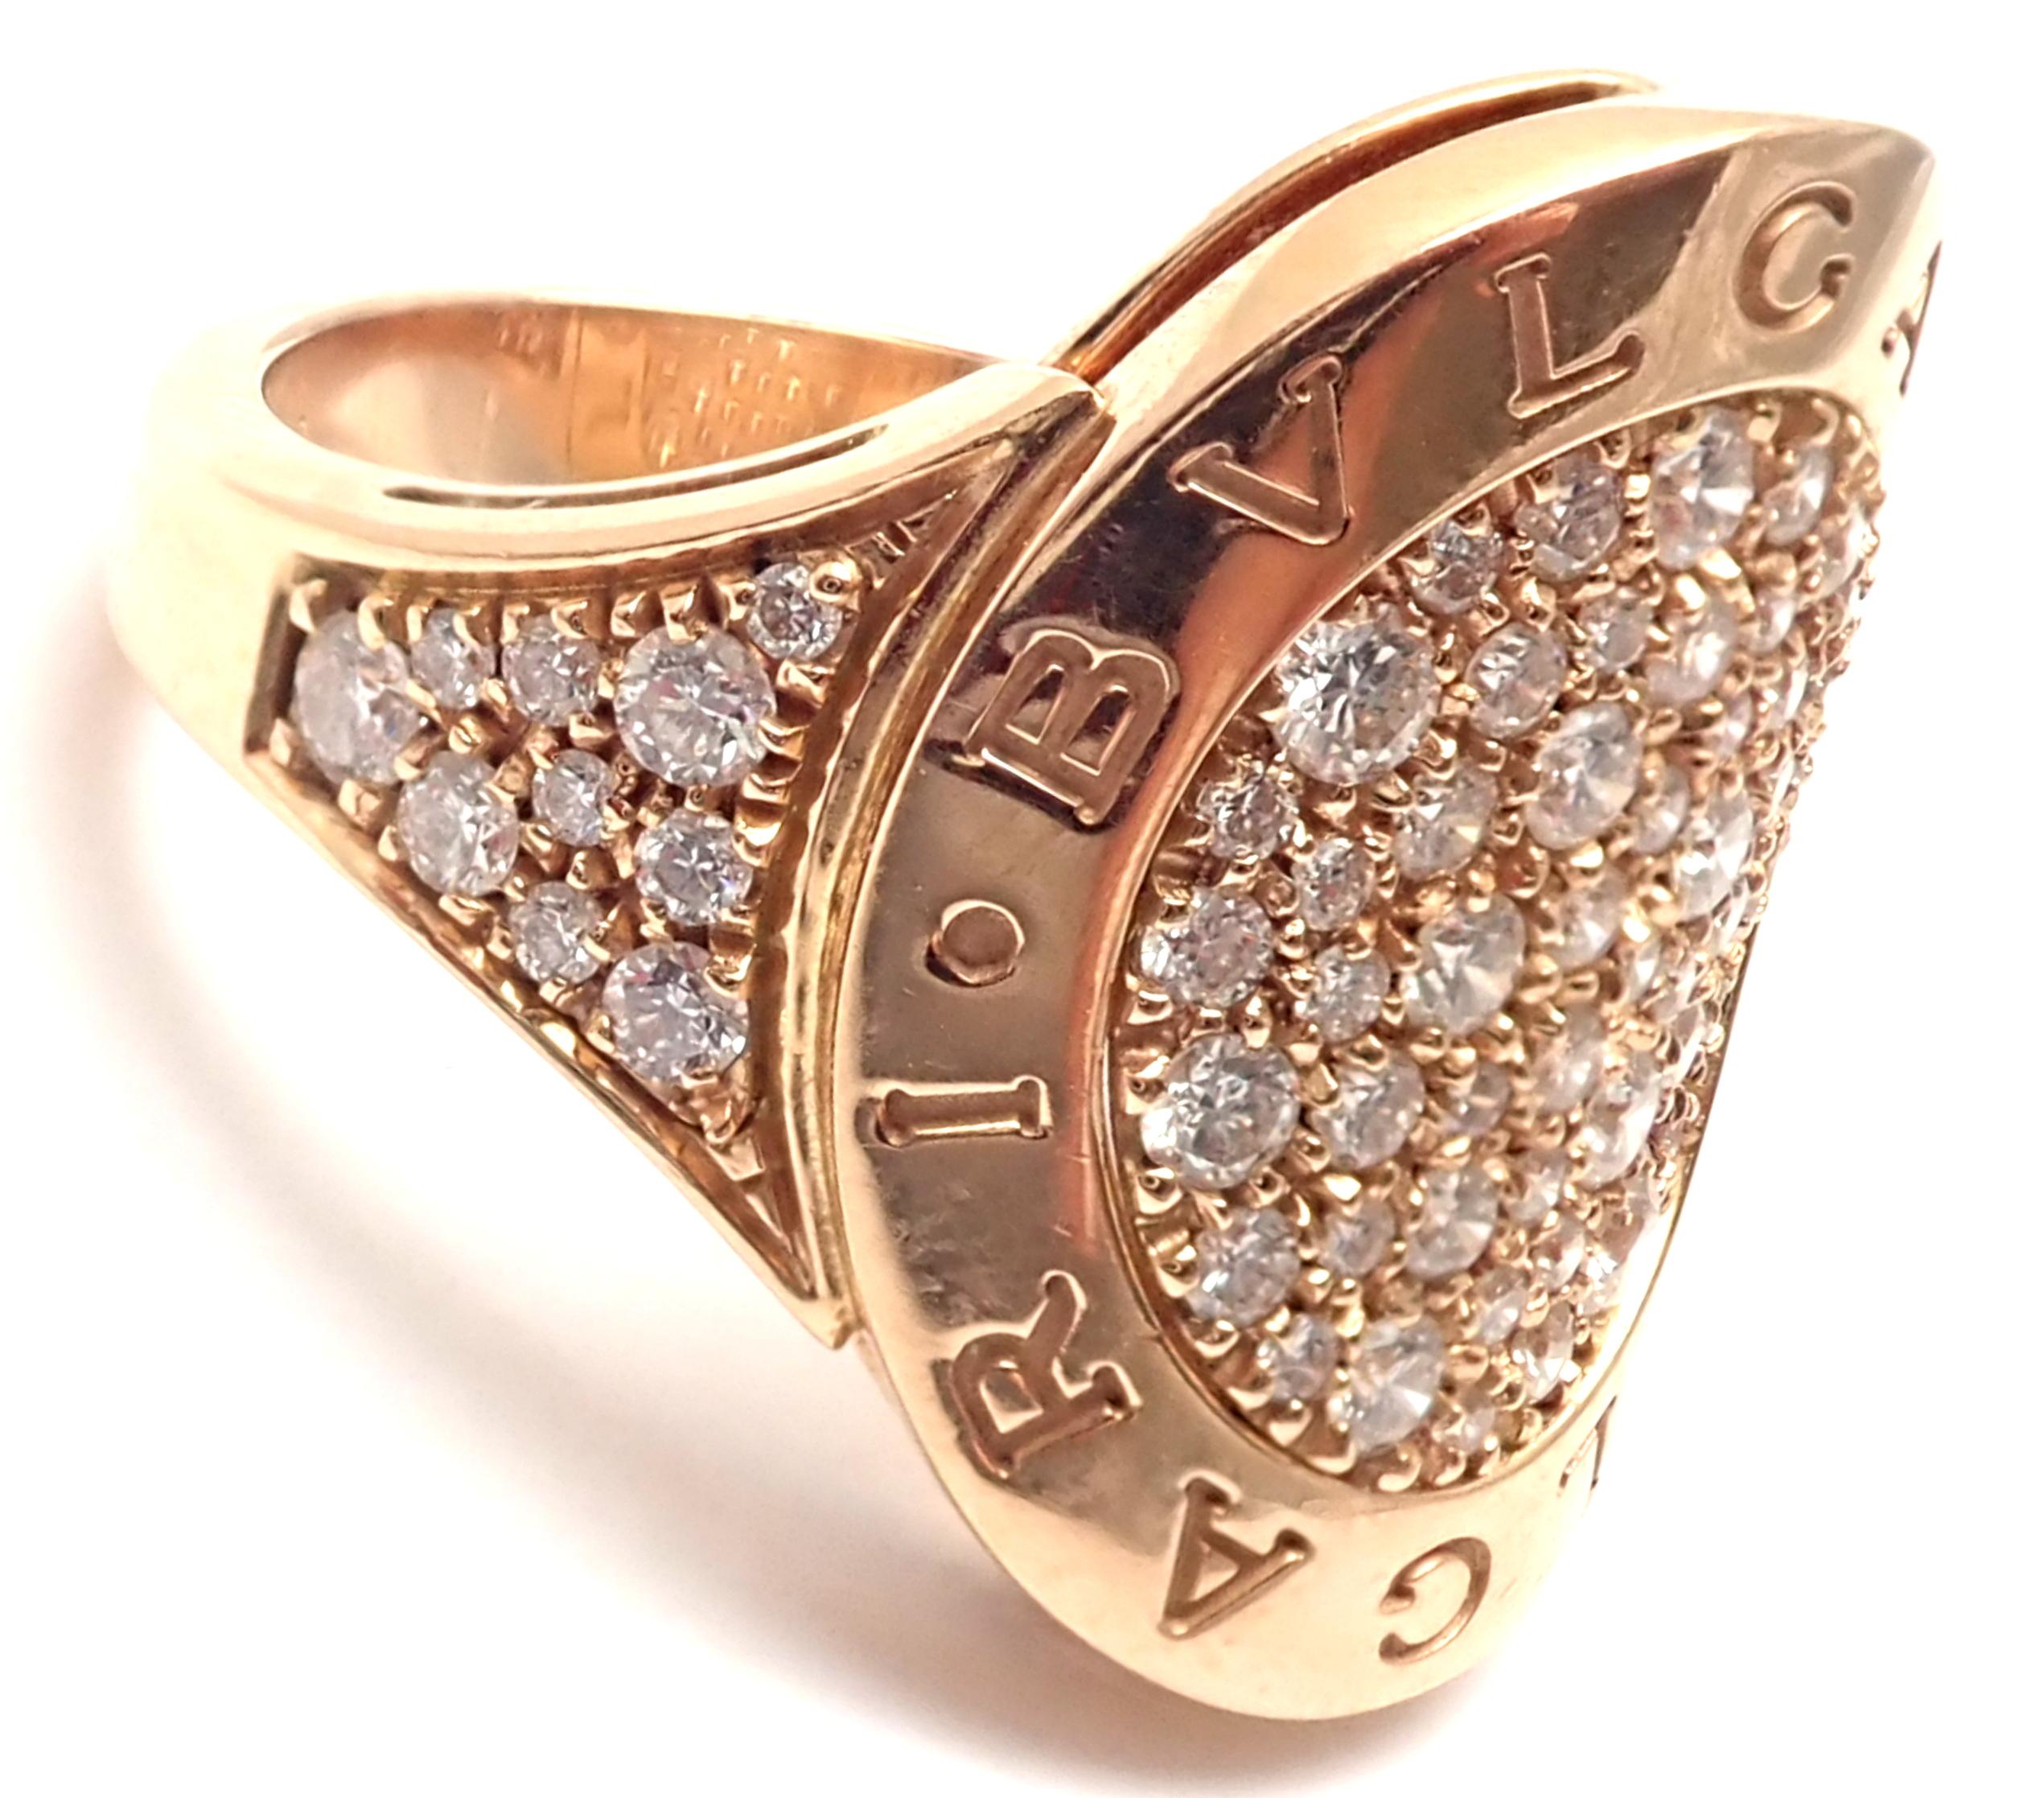 18k Rose Gold Diamond Ring by Bulgari.  
With 72 round brilliant cut diamonds VS1 clarity E color total weight approx. .95ct
Details: Size: 6 1/4
Width: 20mm
Weight: 10.3 grams
Stamped Hallmarks: Bvlgari 750  Made In Italy
*Free Shipping within the